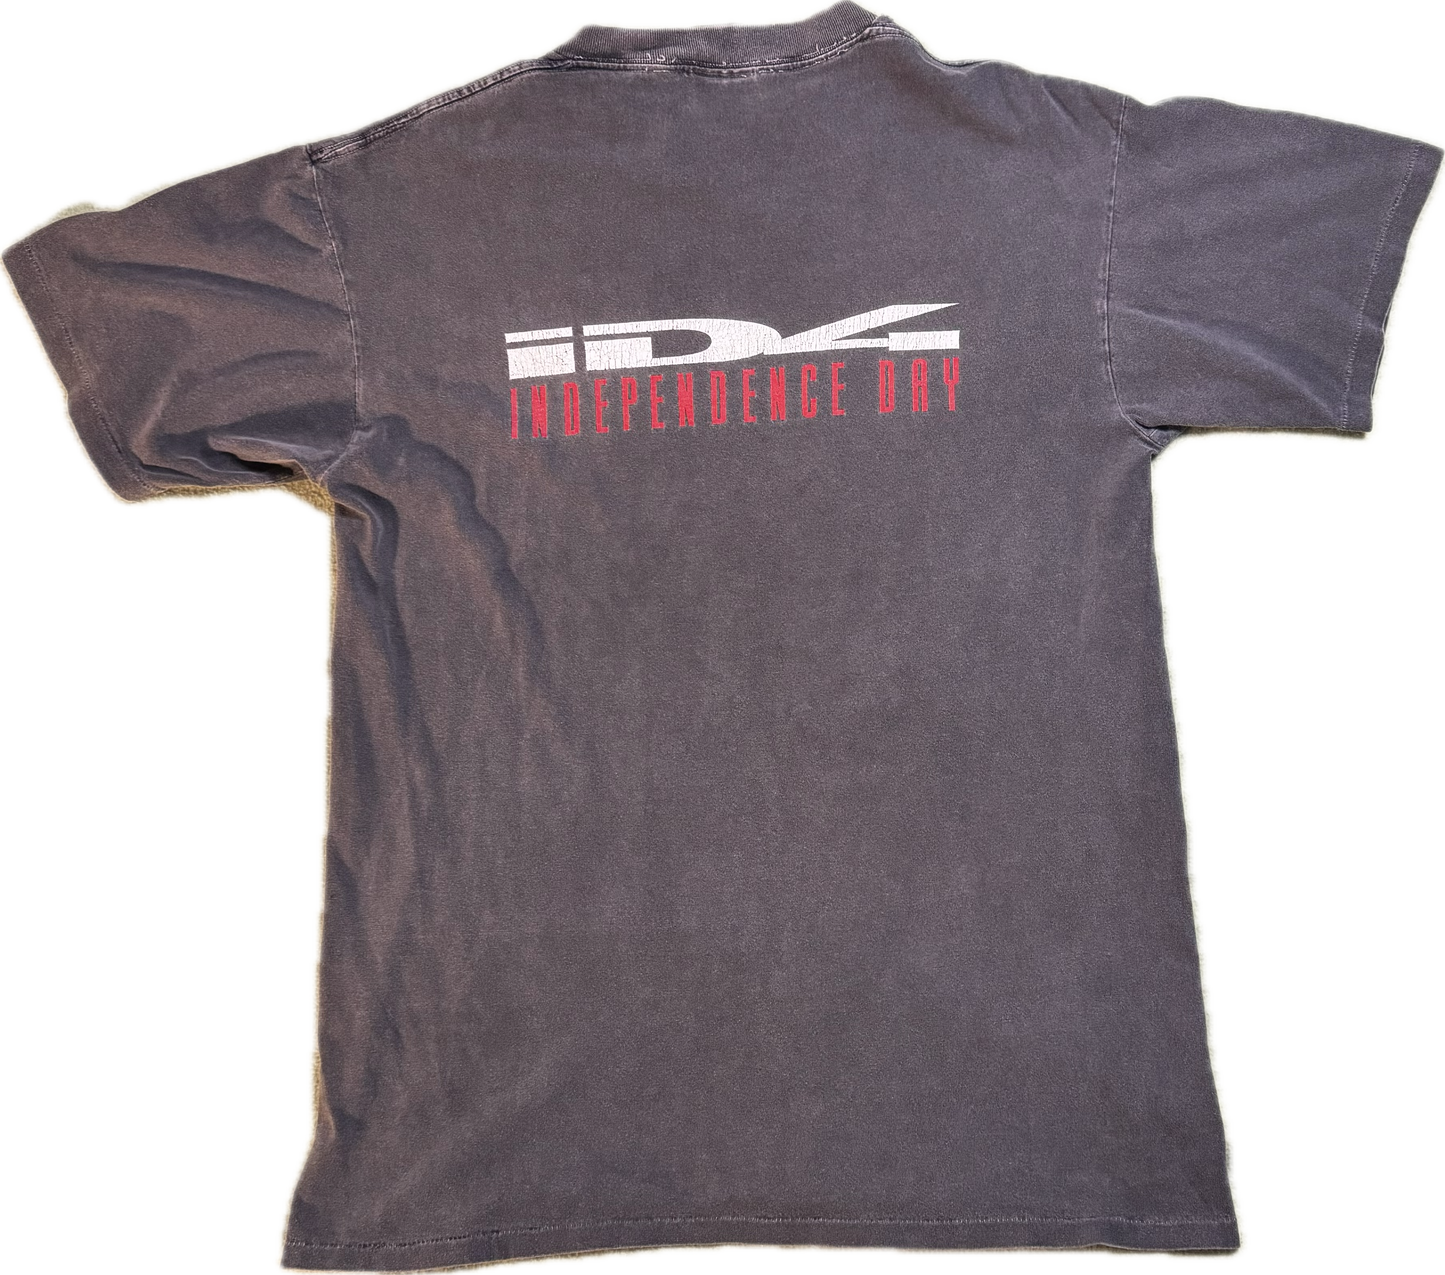 1996 Independence Day Movie T Shirt